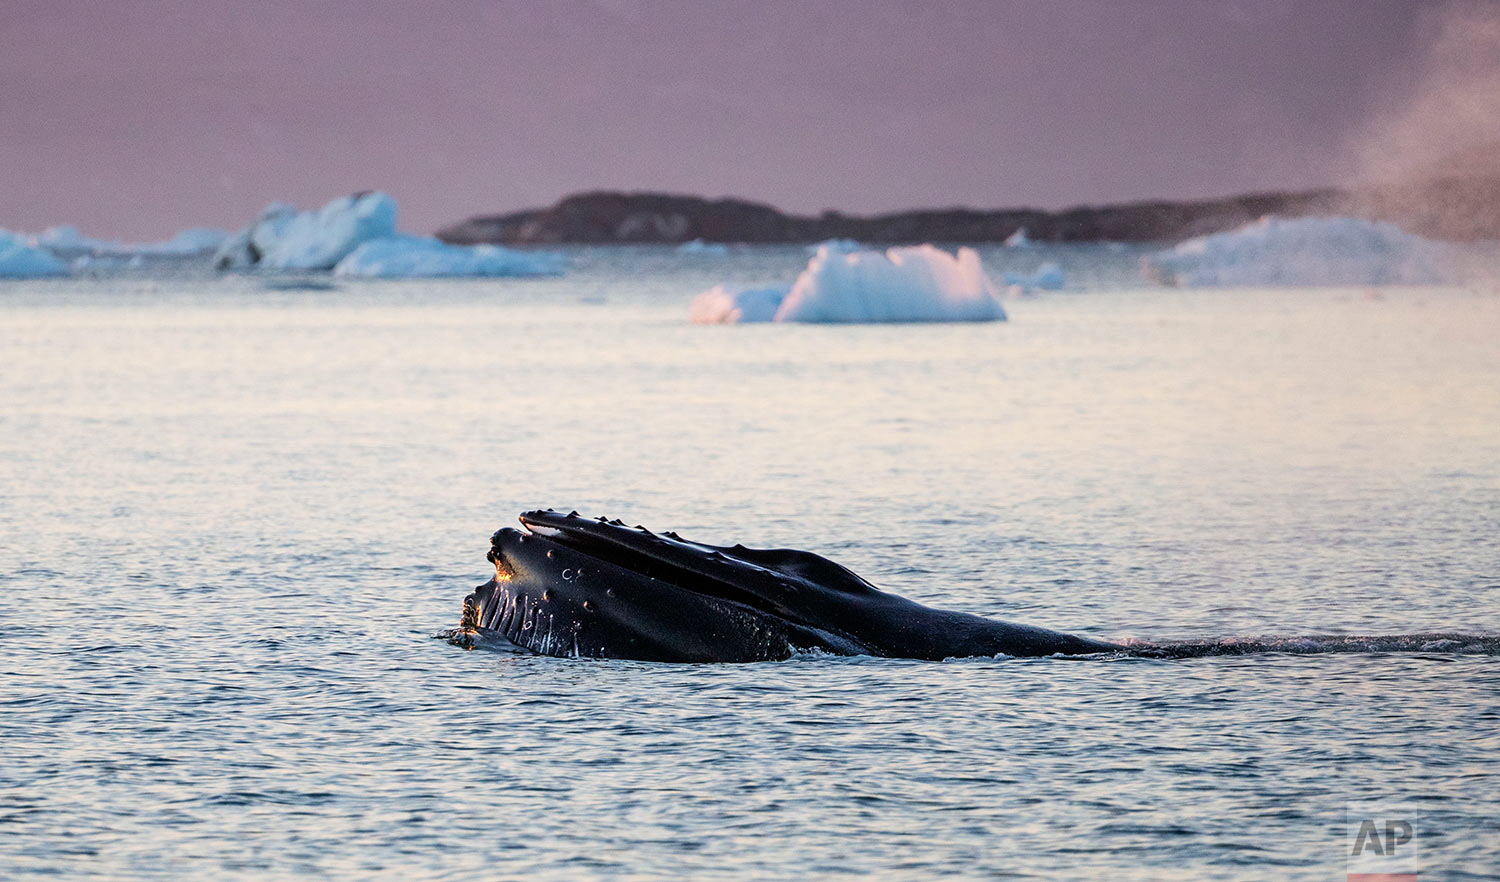  The mouth of a humpback whale emerges while swimming in the Nuup Kangerlua Fjord near Nuuk in southwestern Greenland, Tuesday, Aug. 1, 2017. Algae that cling to the underside of sea ice are losing their habitat. If they vanish, the impact will be fe